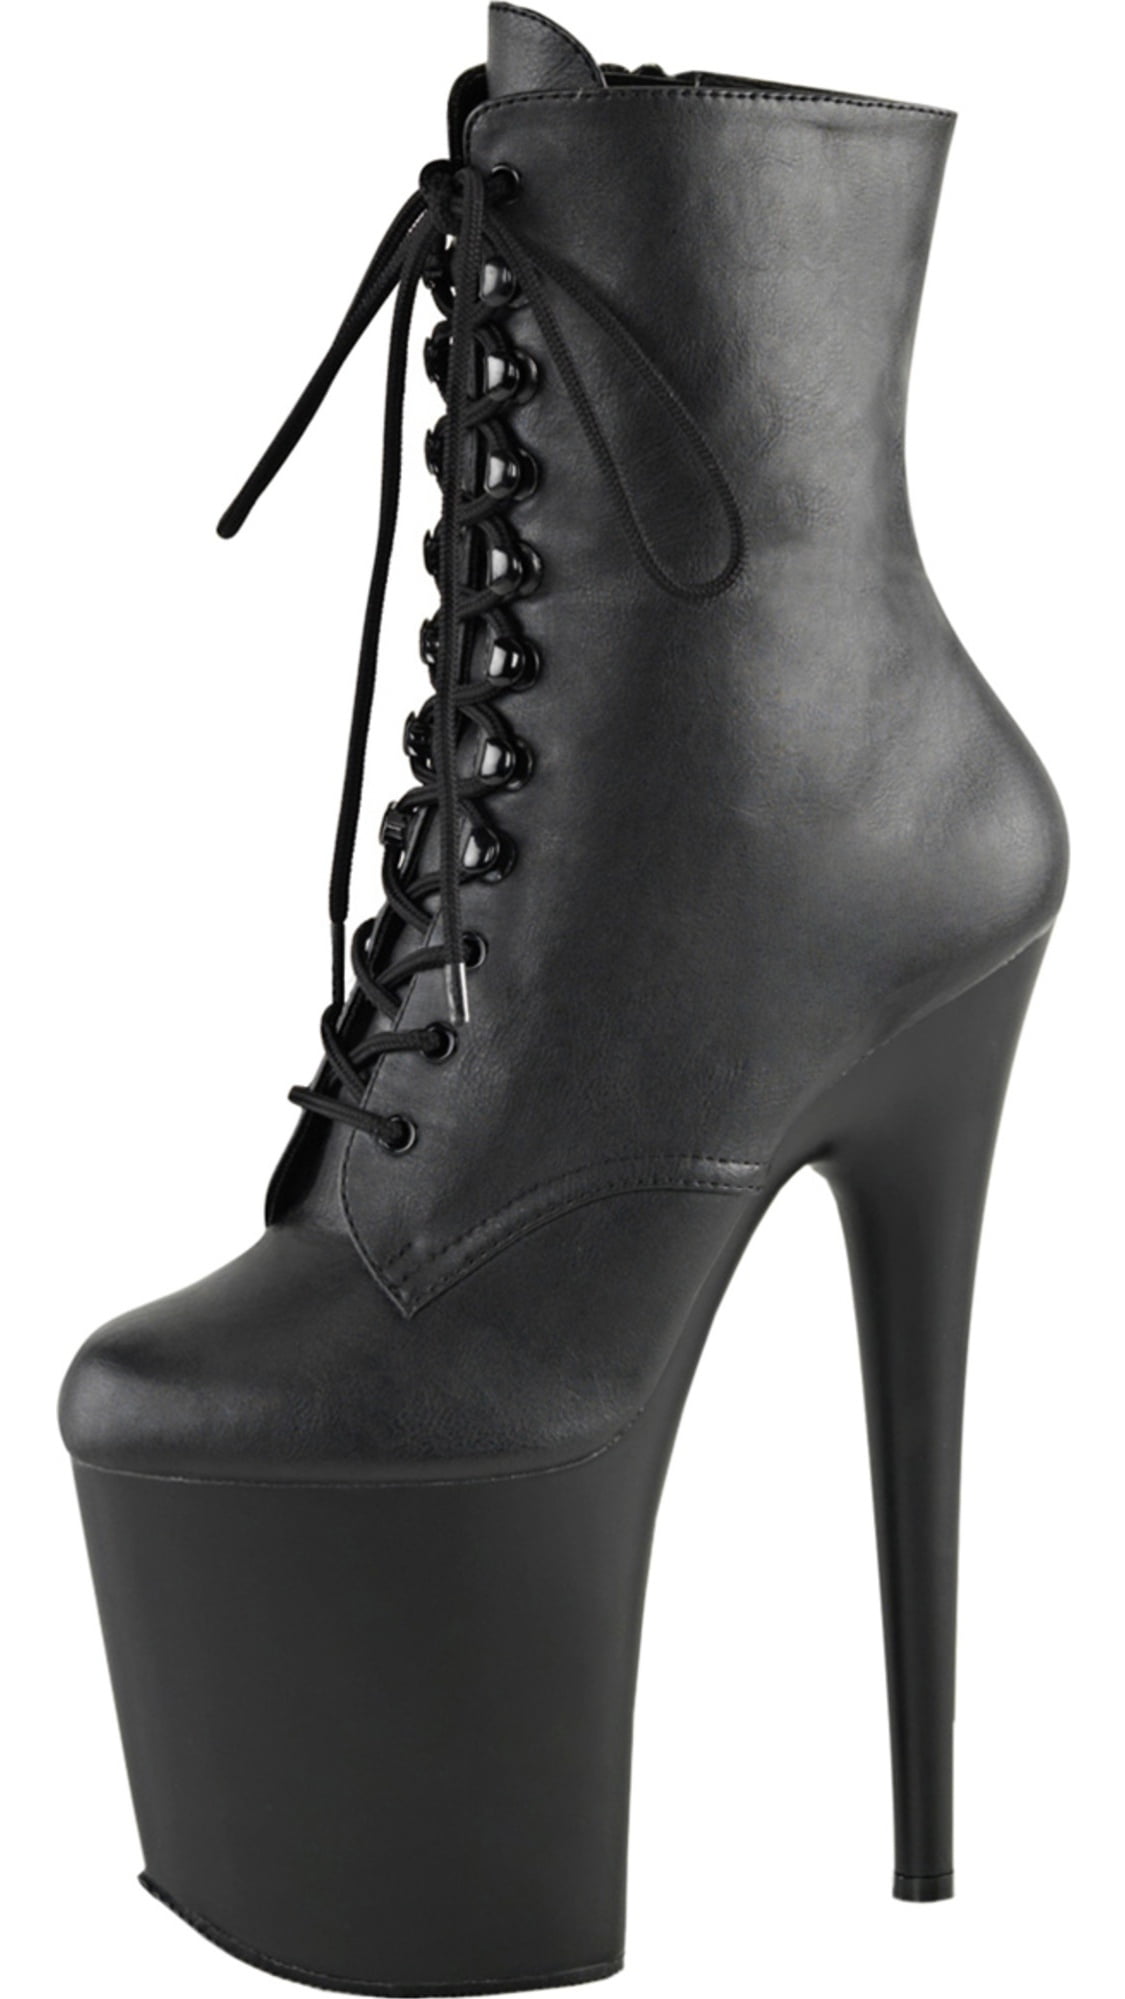 Pleaser - Womens Side Zip Boots Black Platform Booties Ankle High Lace ...